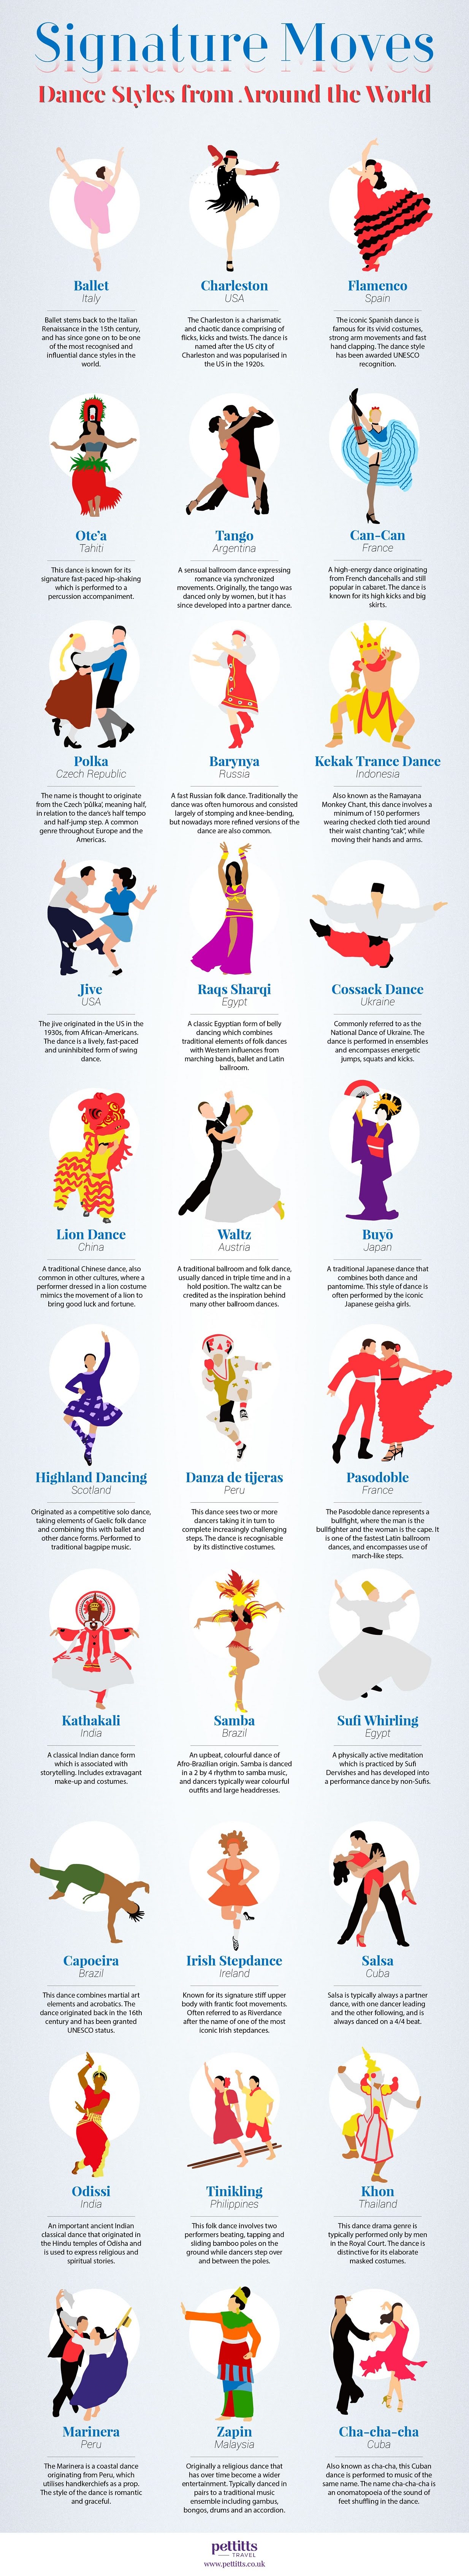 Signature Moves Dance Styles from Around the World #infographic